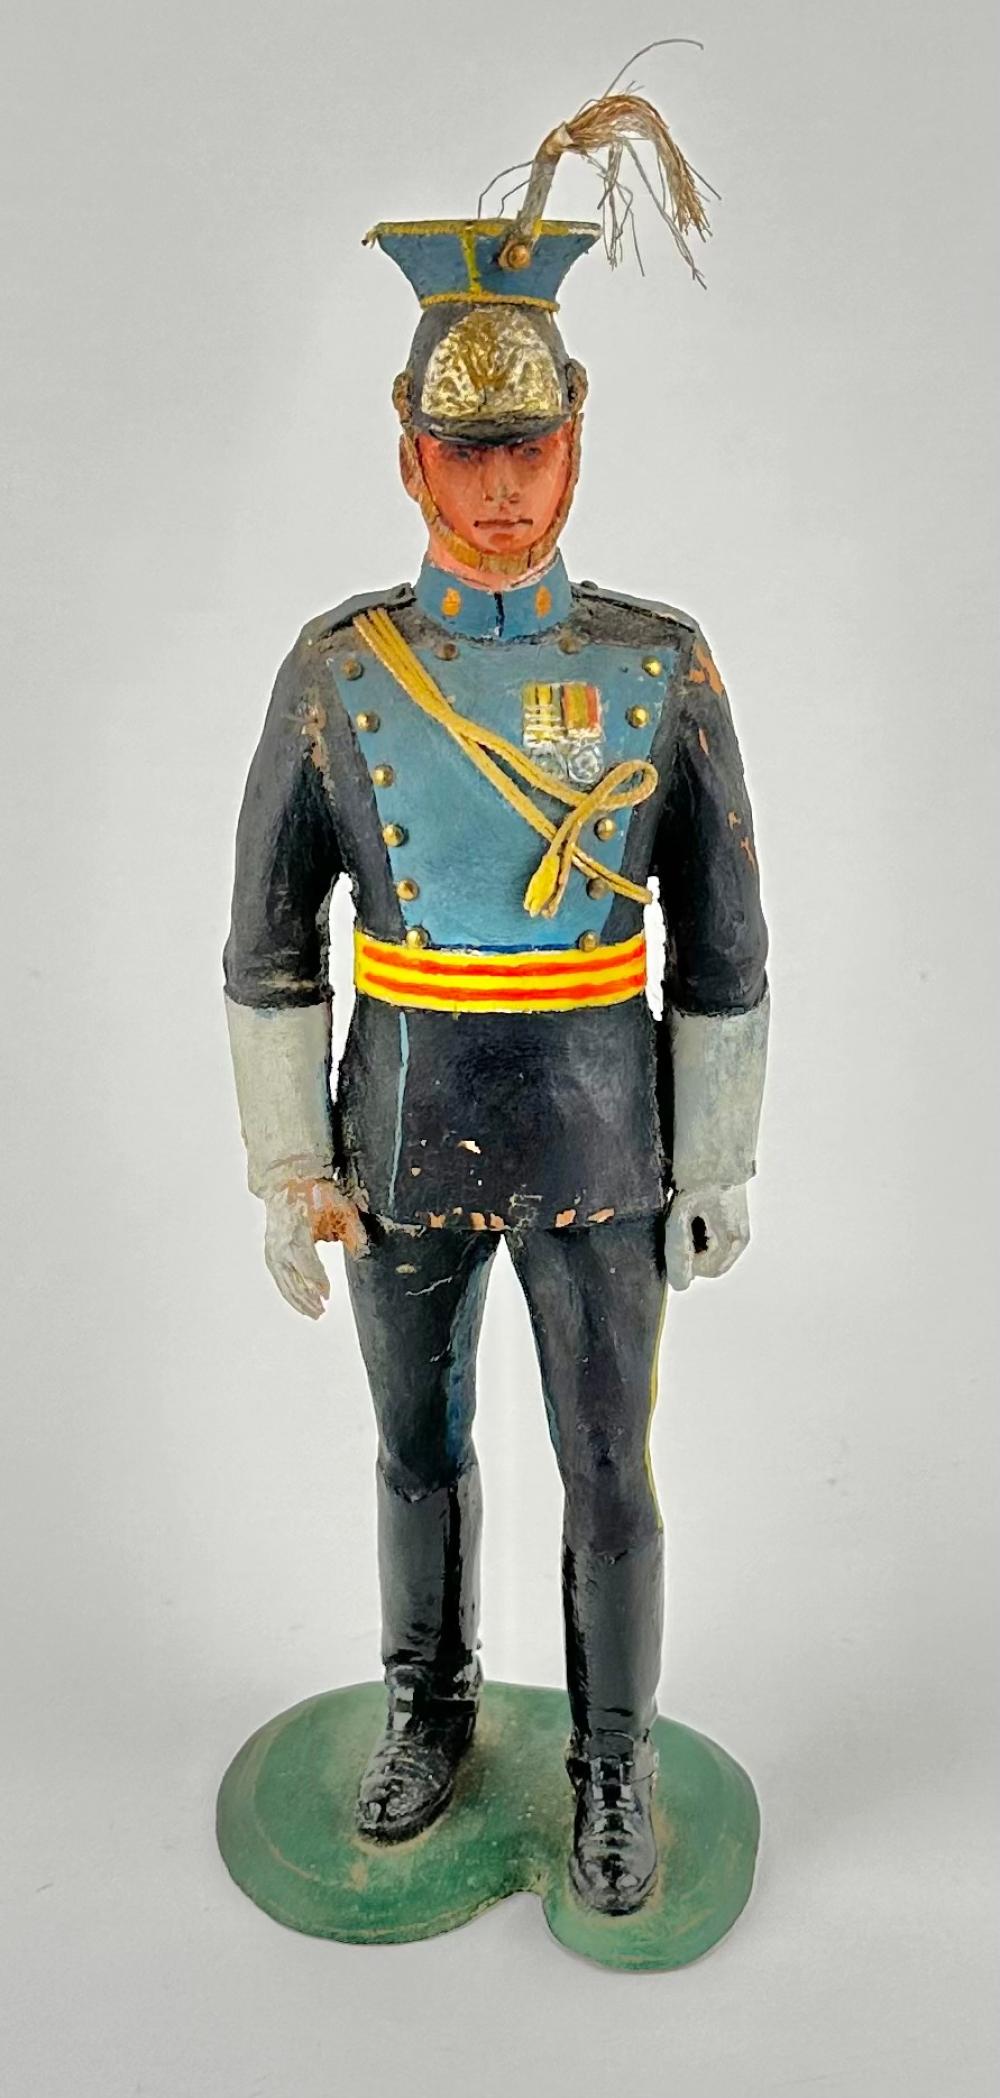 CARVED WOODEN FIGURE OF A SOLDIER 3528ca